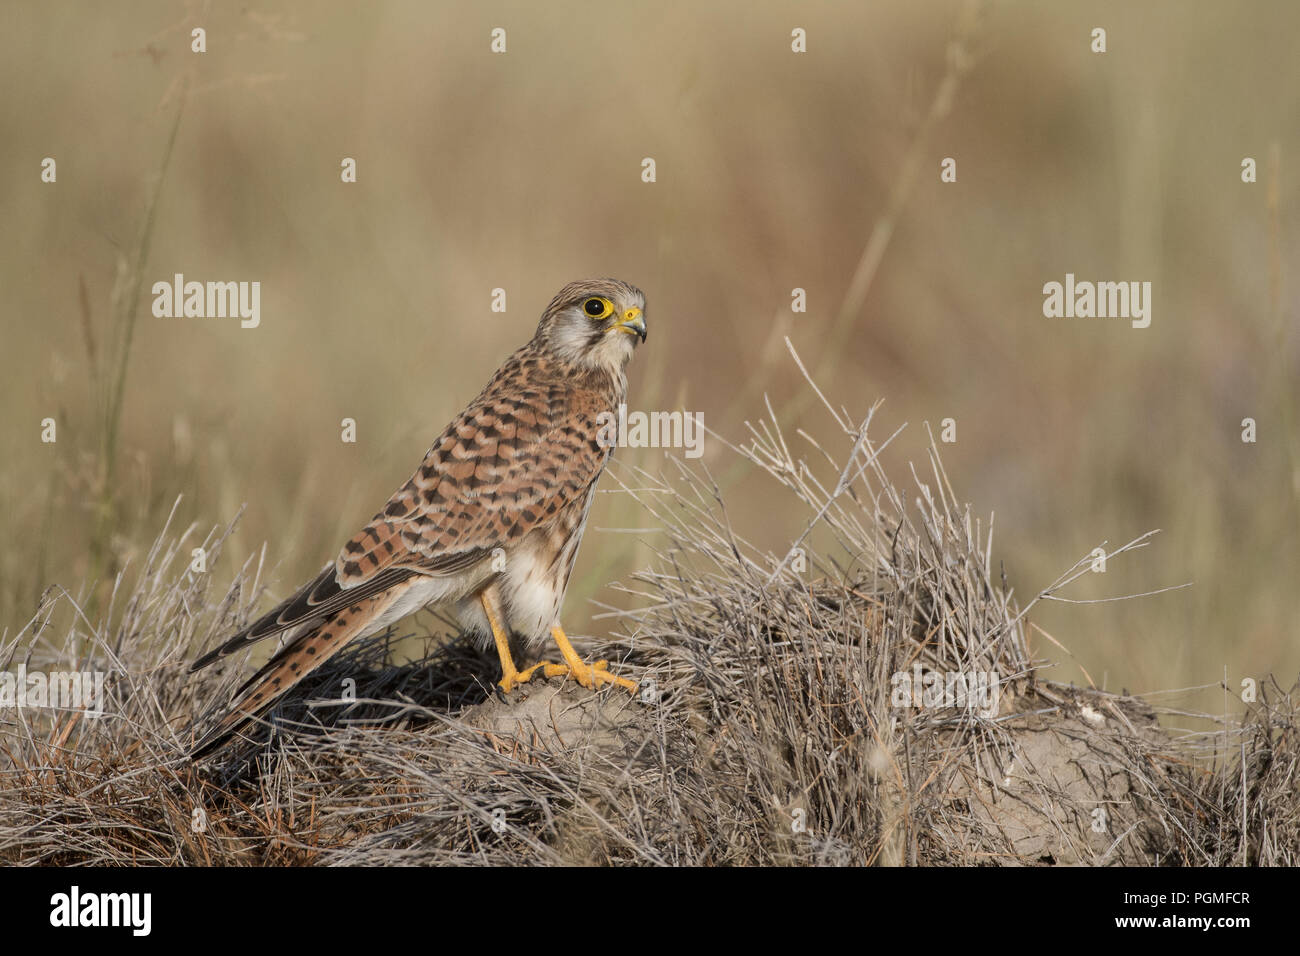 A Common Kestrel (Falco tinnunculus) perched on a grassy patch in Tal Chapar Wildlife Sanctuary, Rajasthan, India Stock Photo